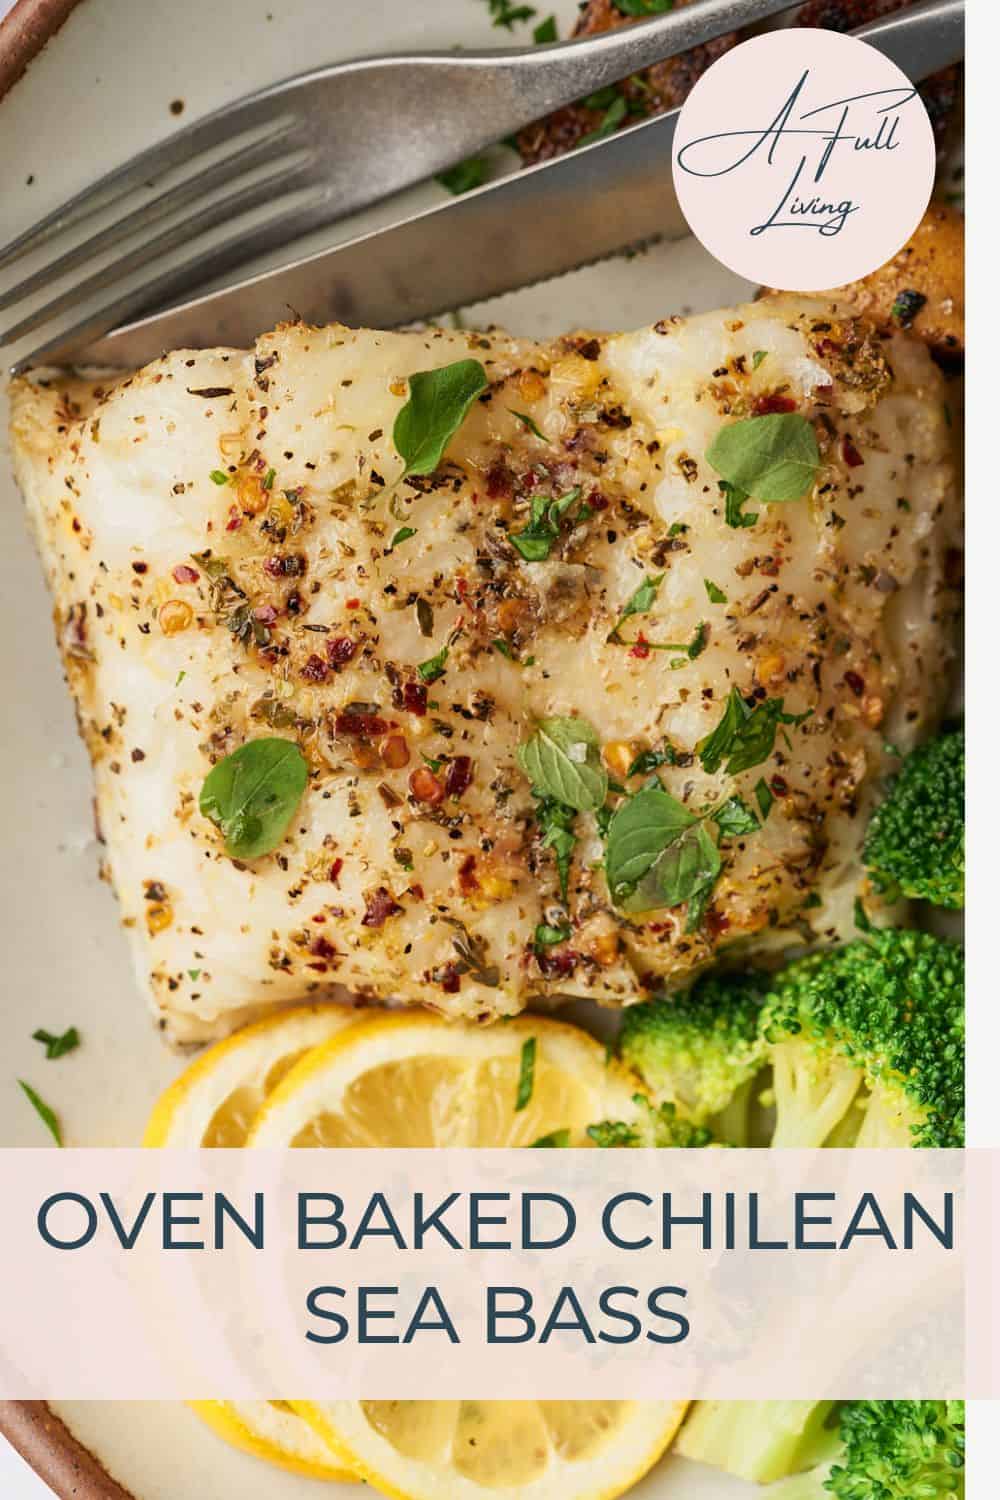 oven baked chilean sea bass.